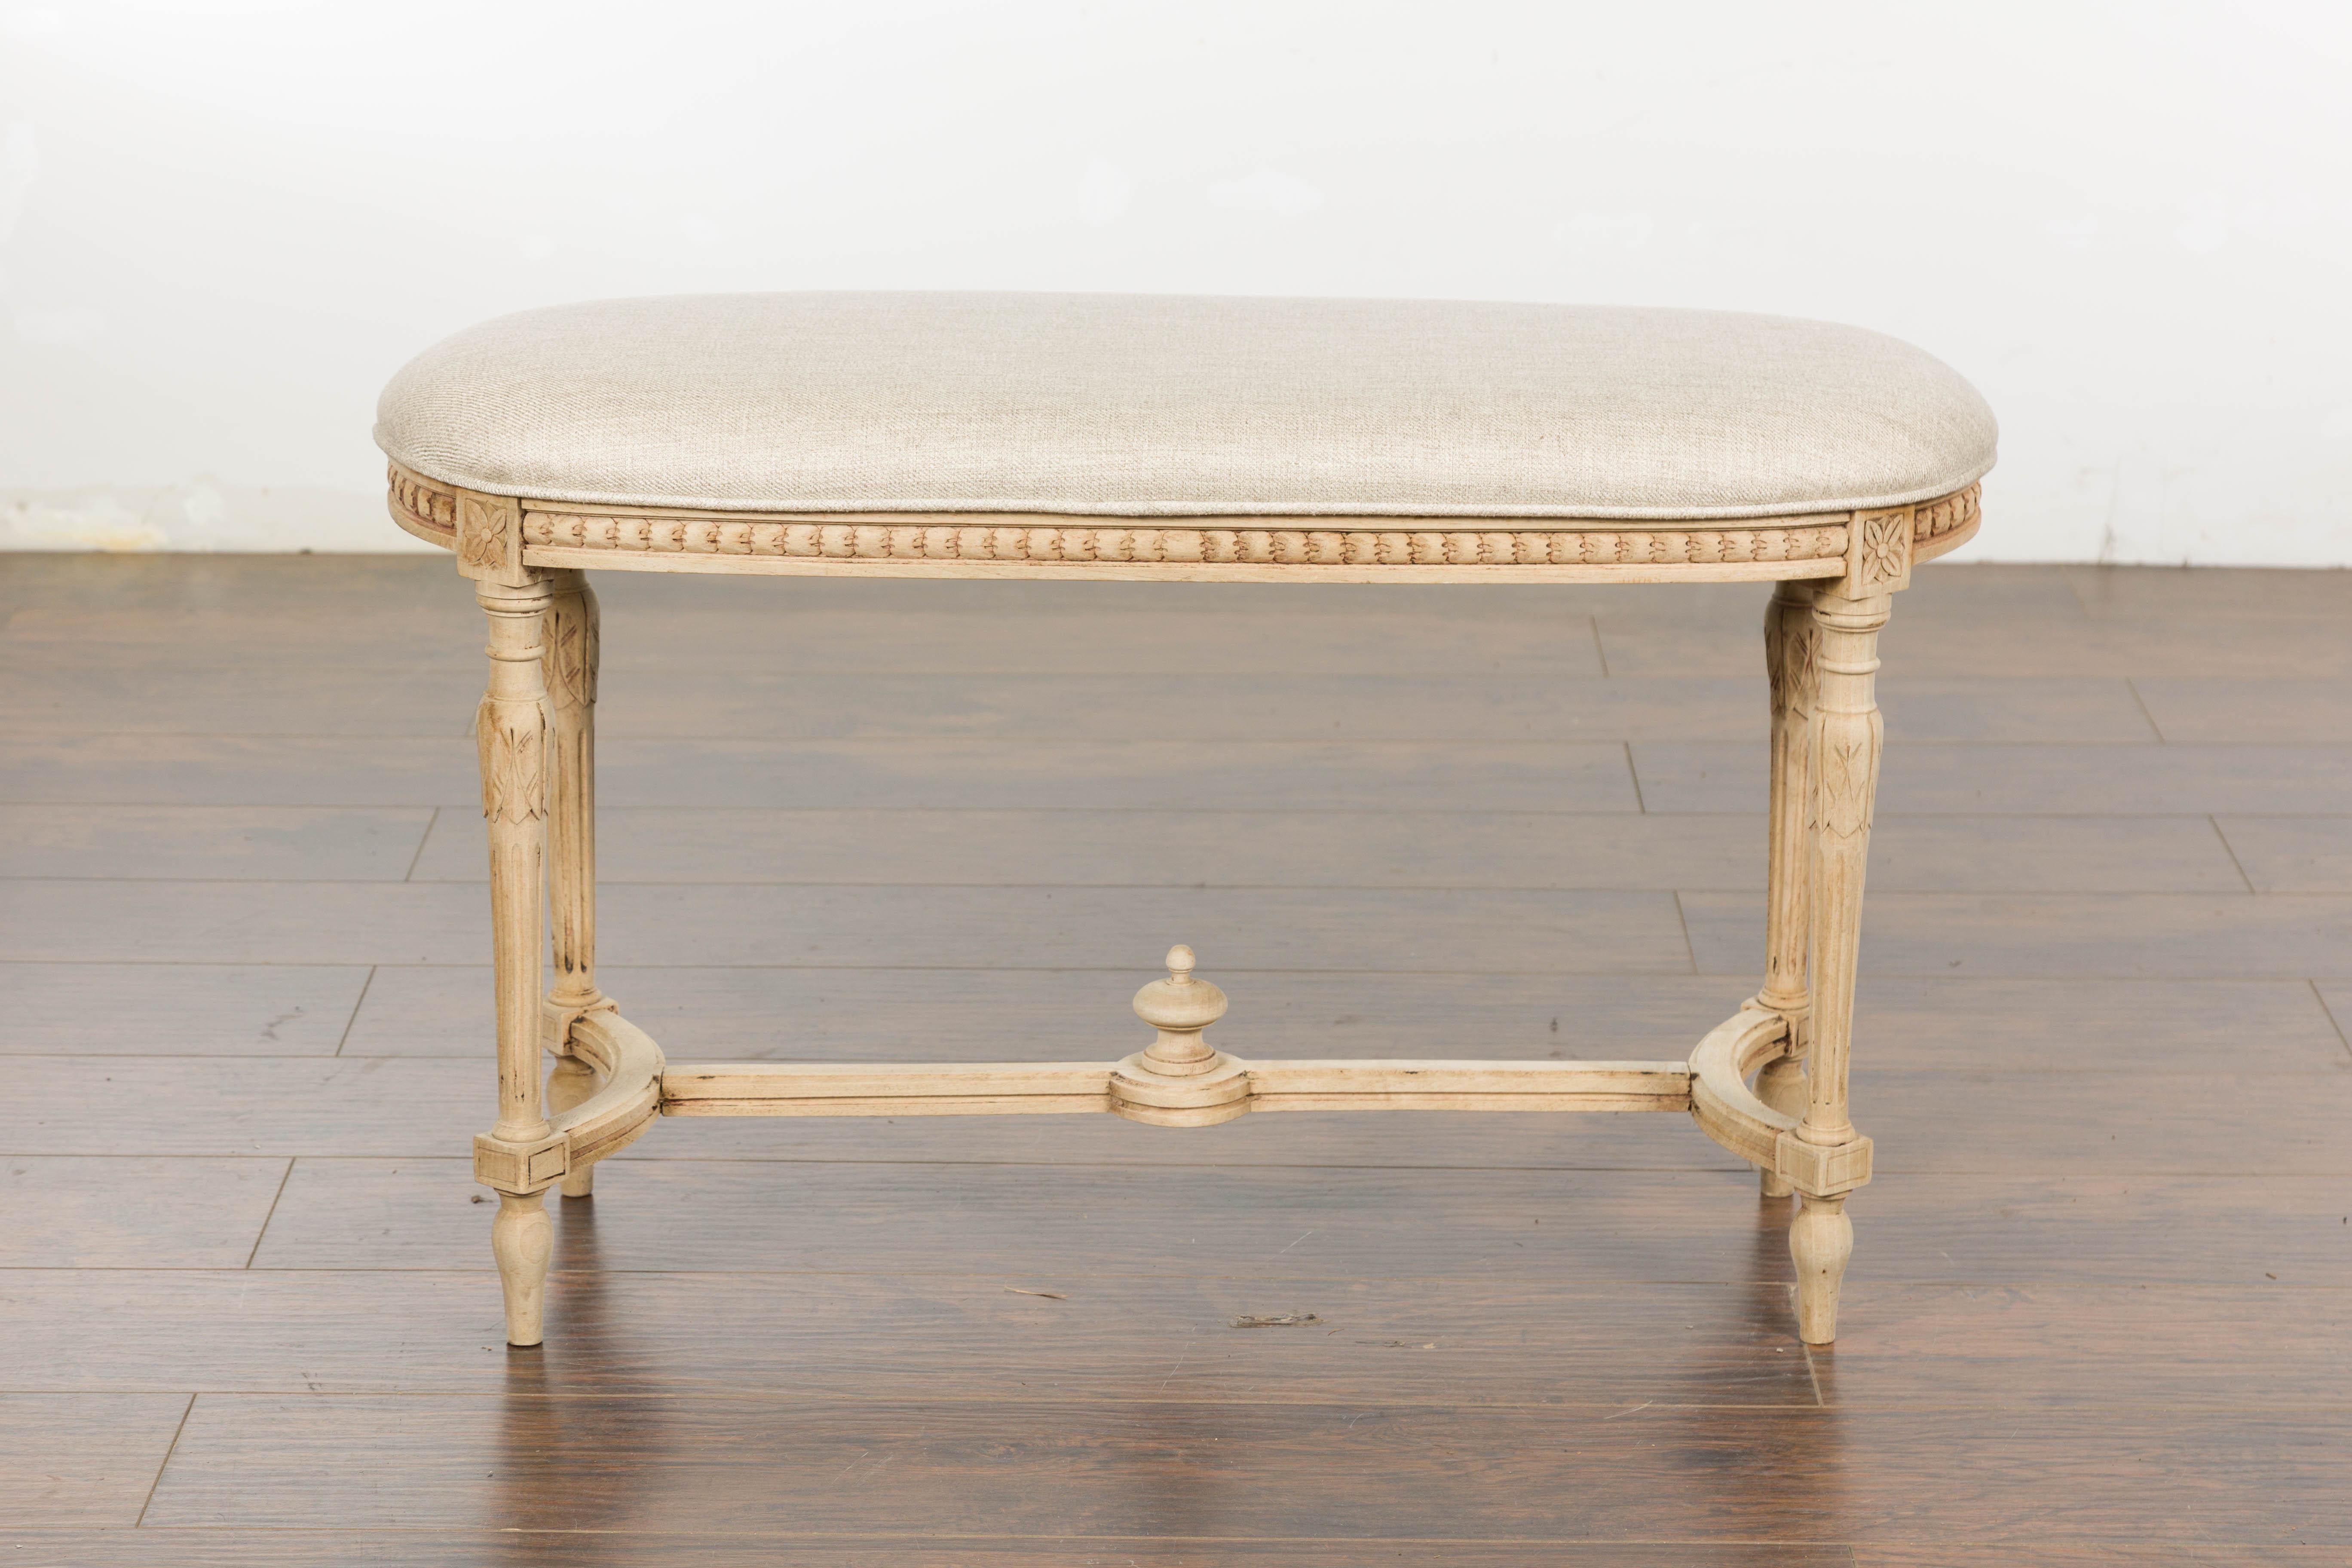 20th Century Neoclassical Style 1900s French Carved Walnut Bench with Natural Finish For Sale